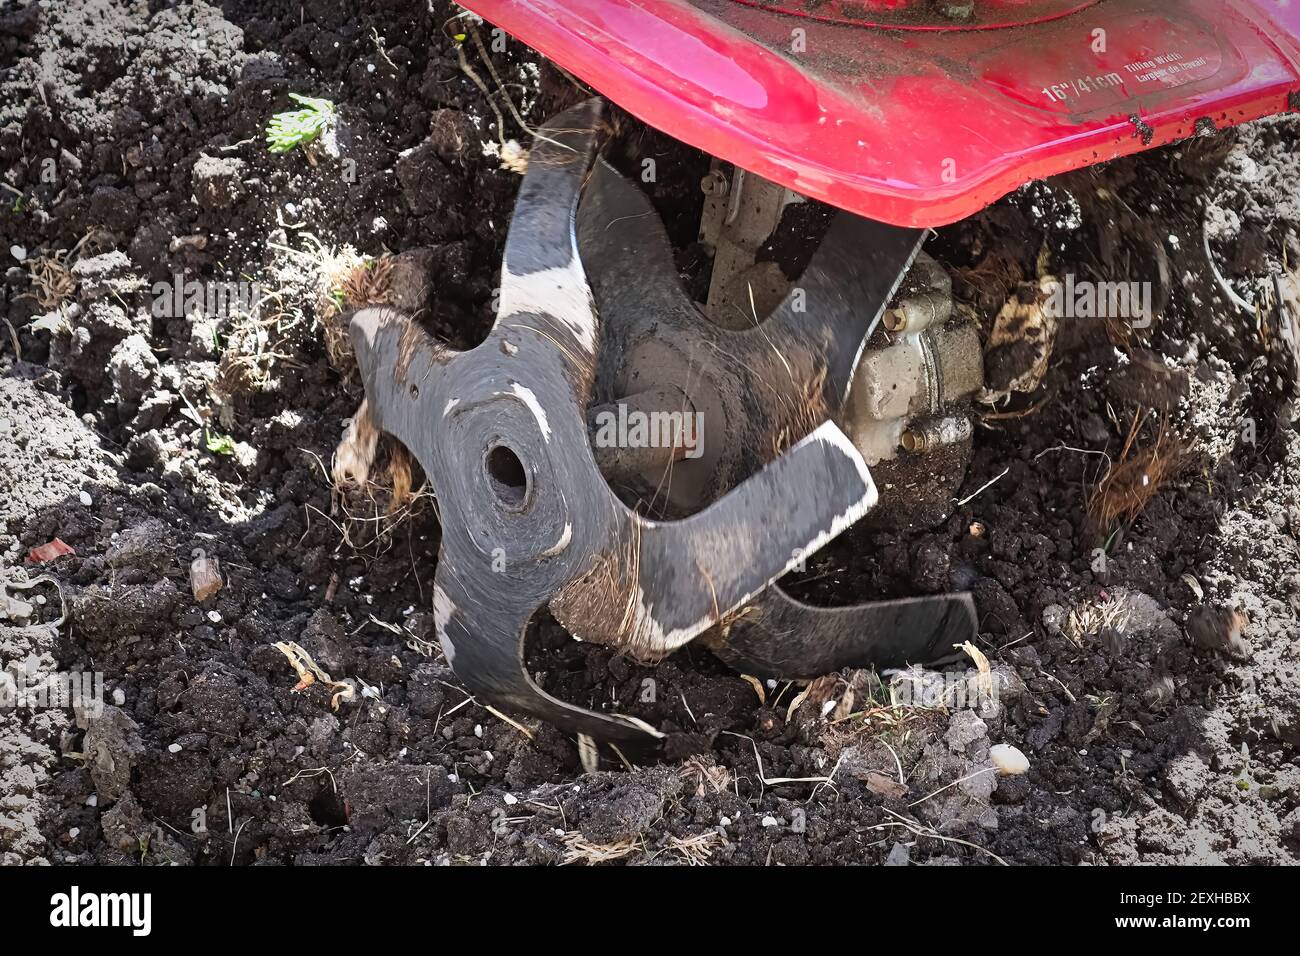 Cultivating garden soil in the spring with a rototiller Stock Photo